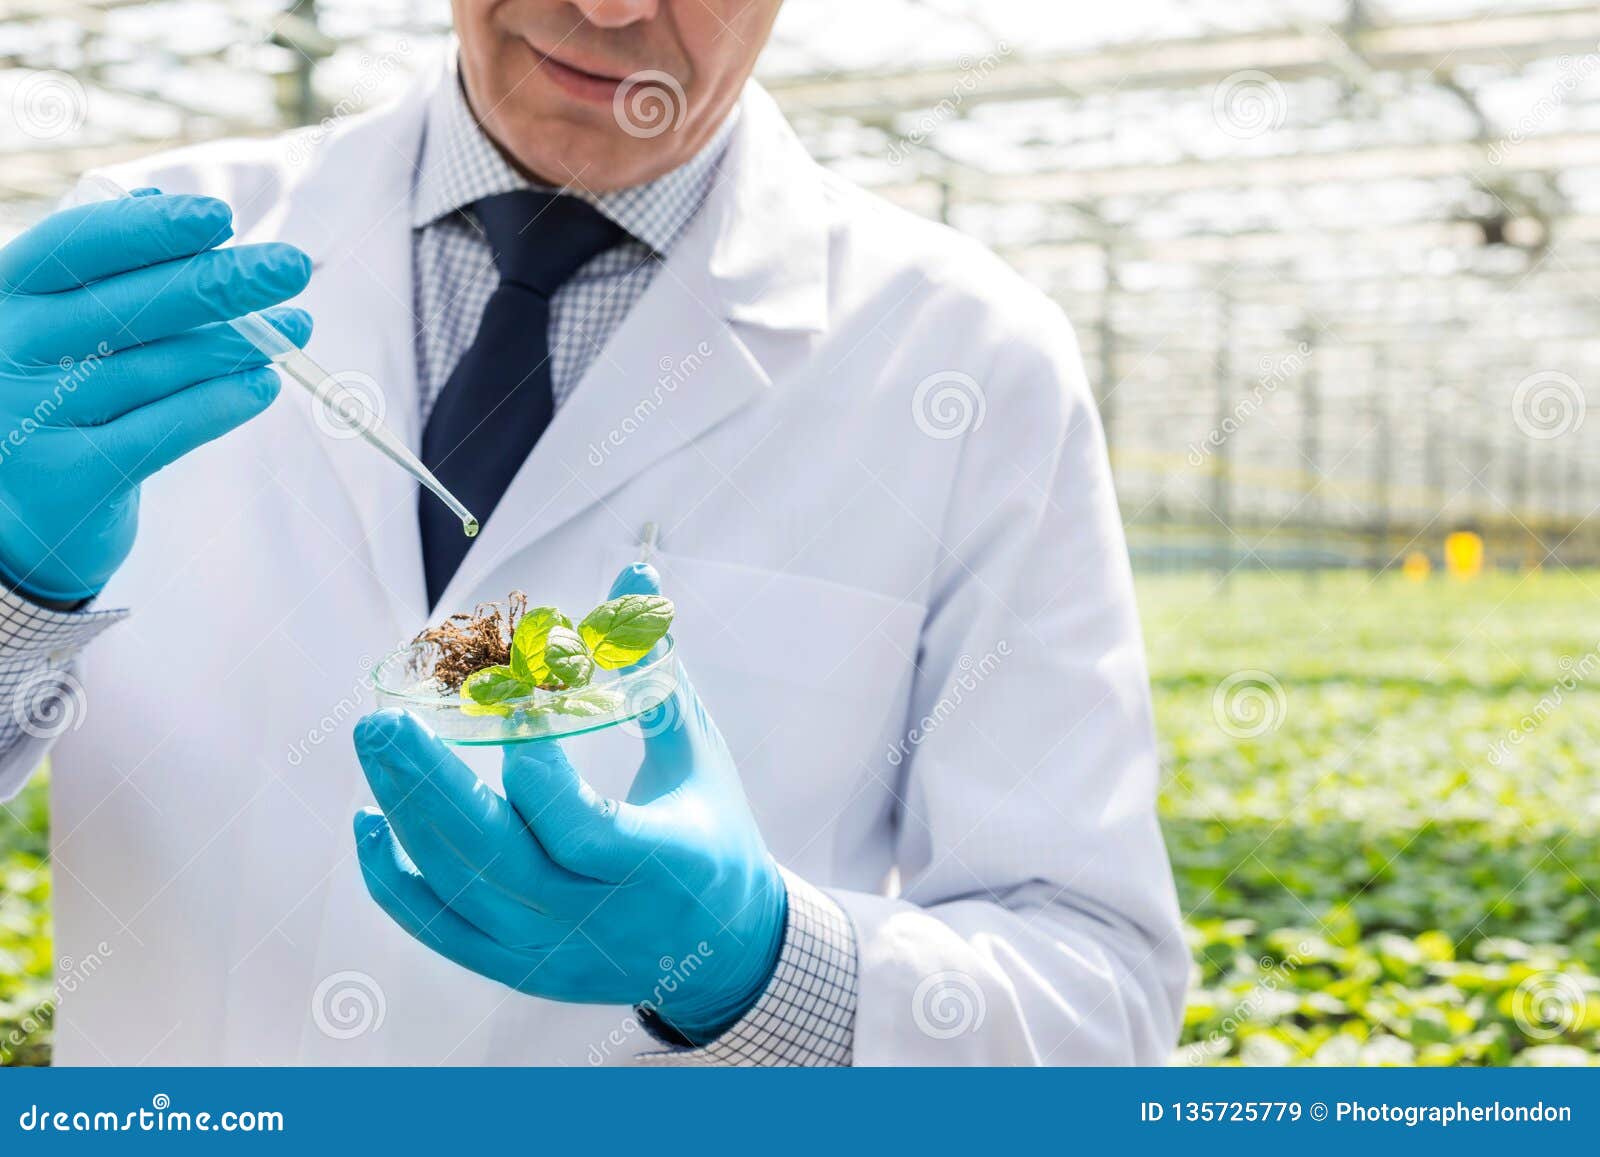 midsection of male biochemist using pipette on seedling in petri dish at greenhouse